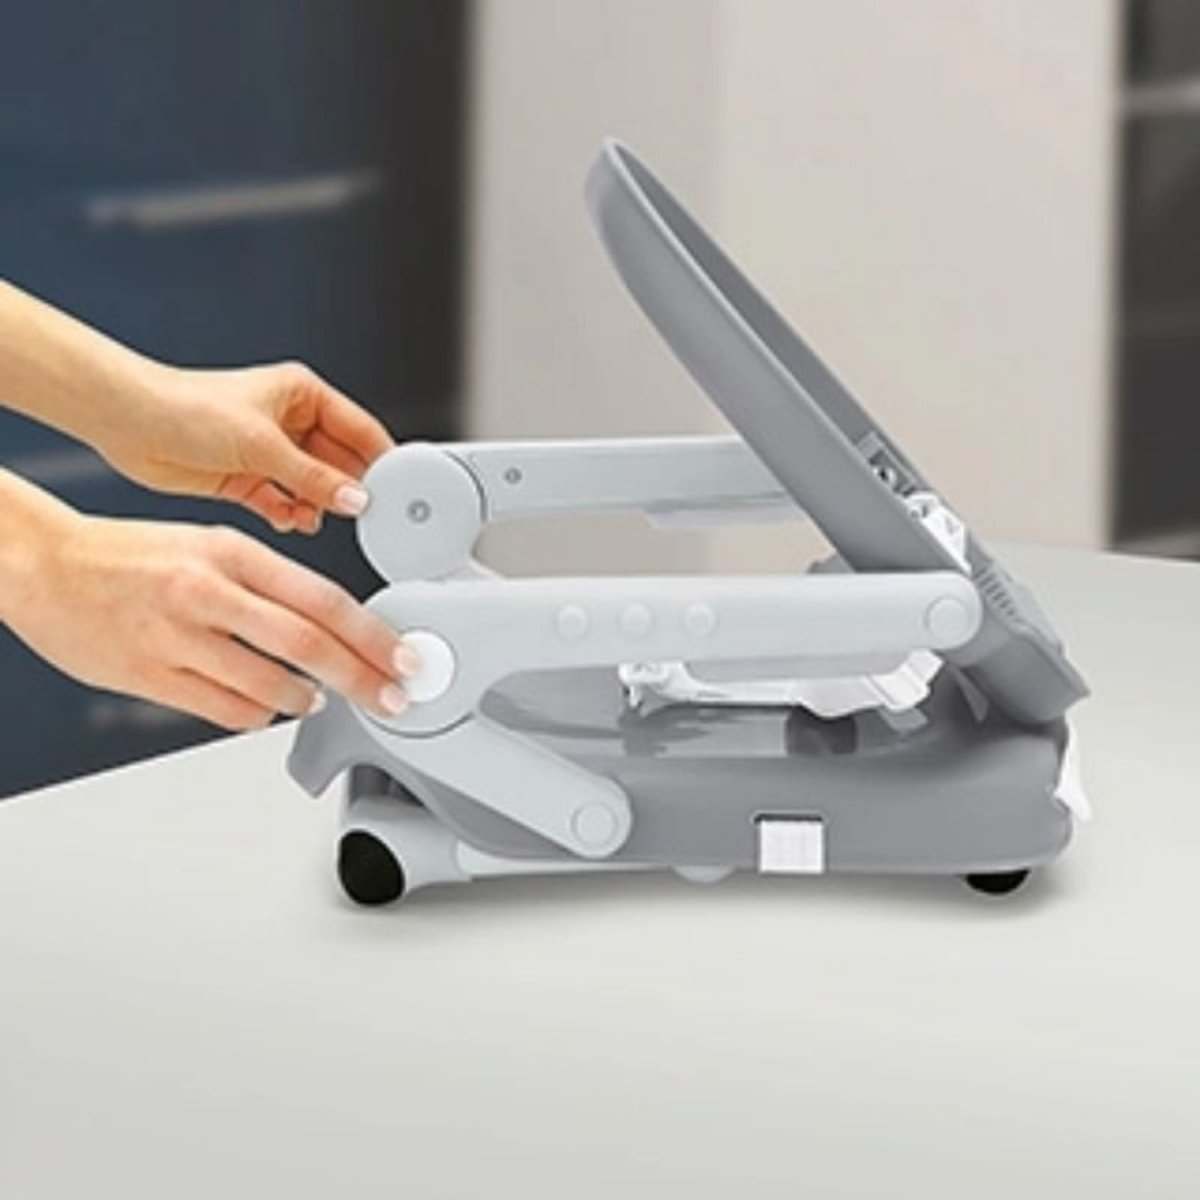 Pocket Snack booster Seat Grey